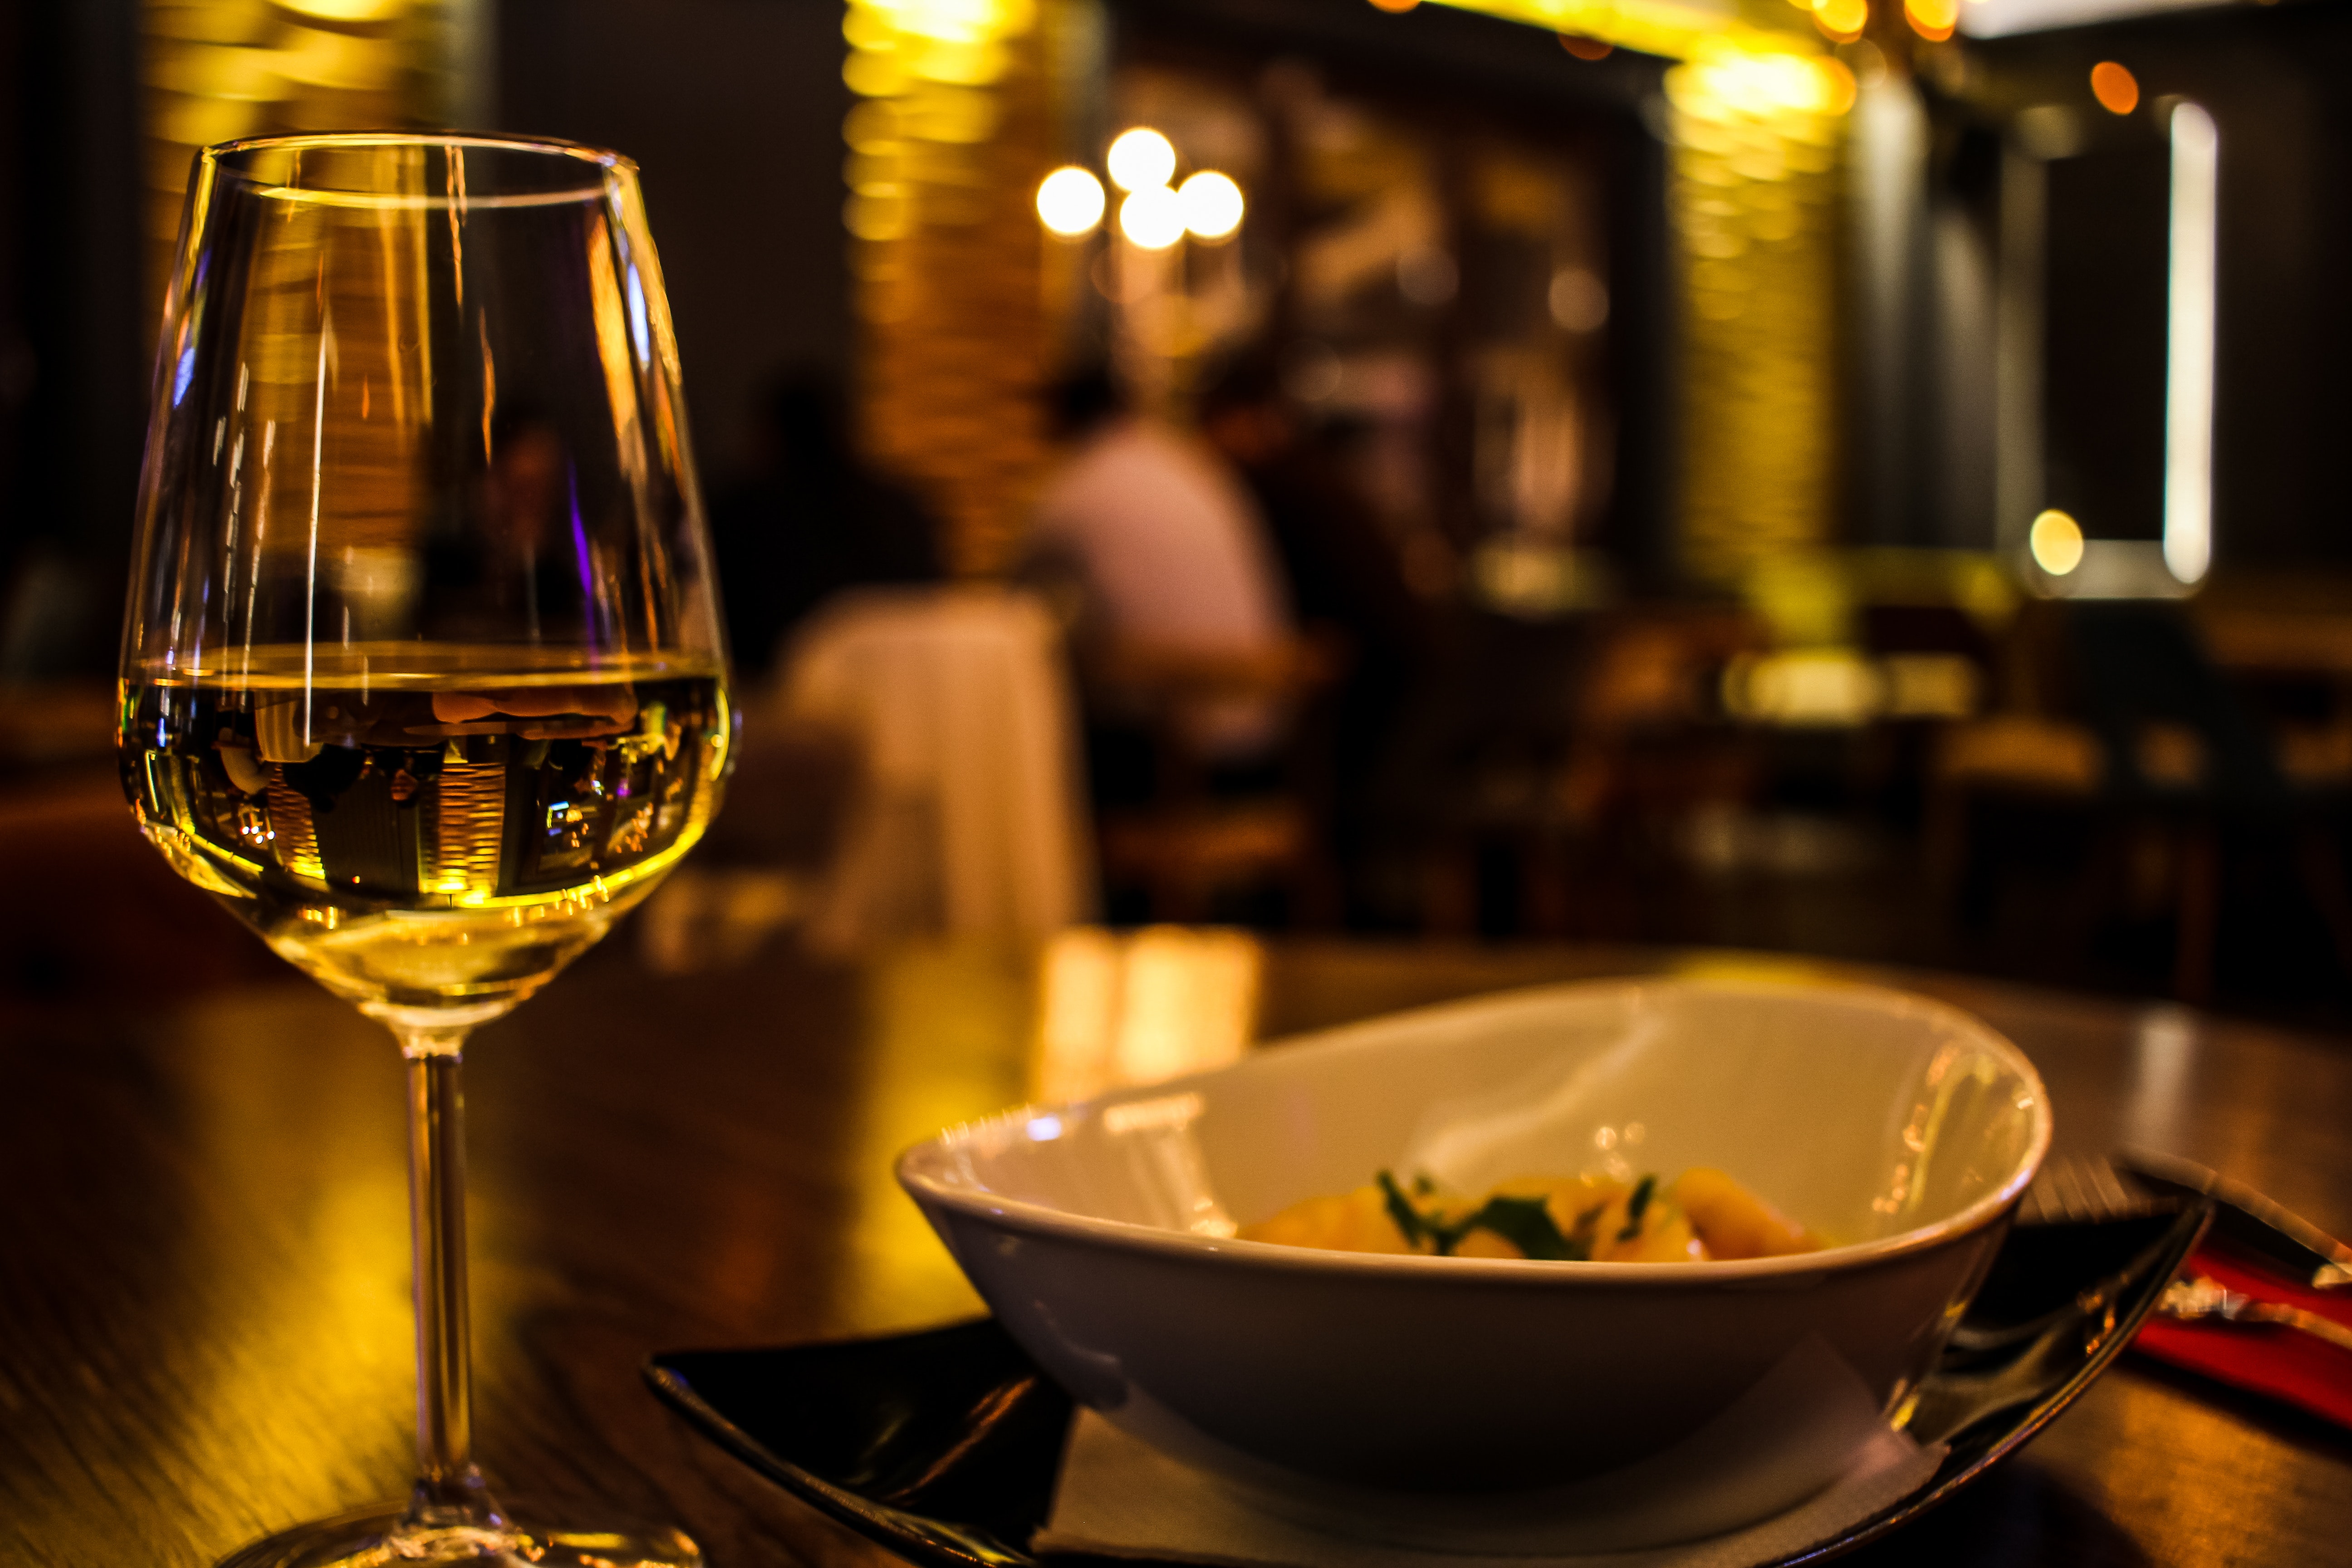 glass of wine and dish of food in an upscale restaurant